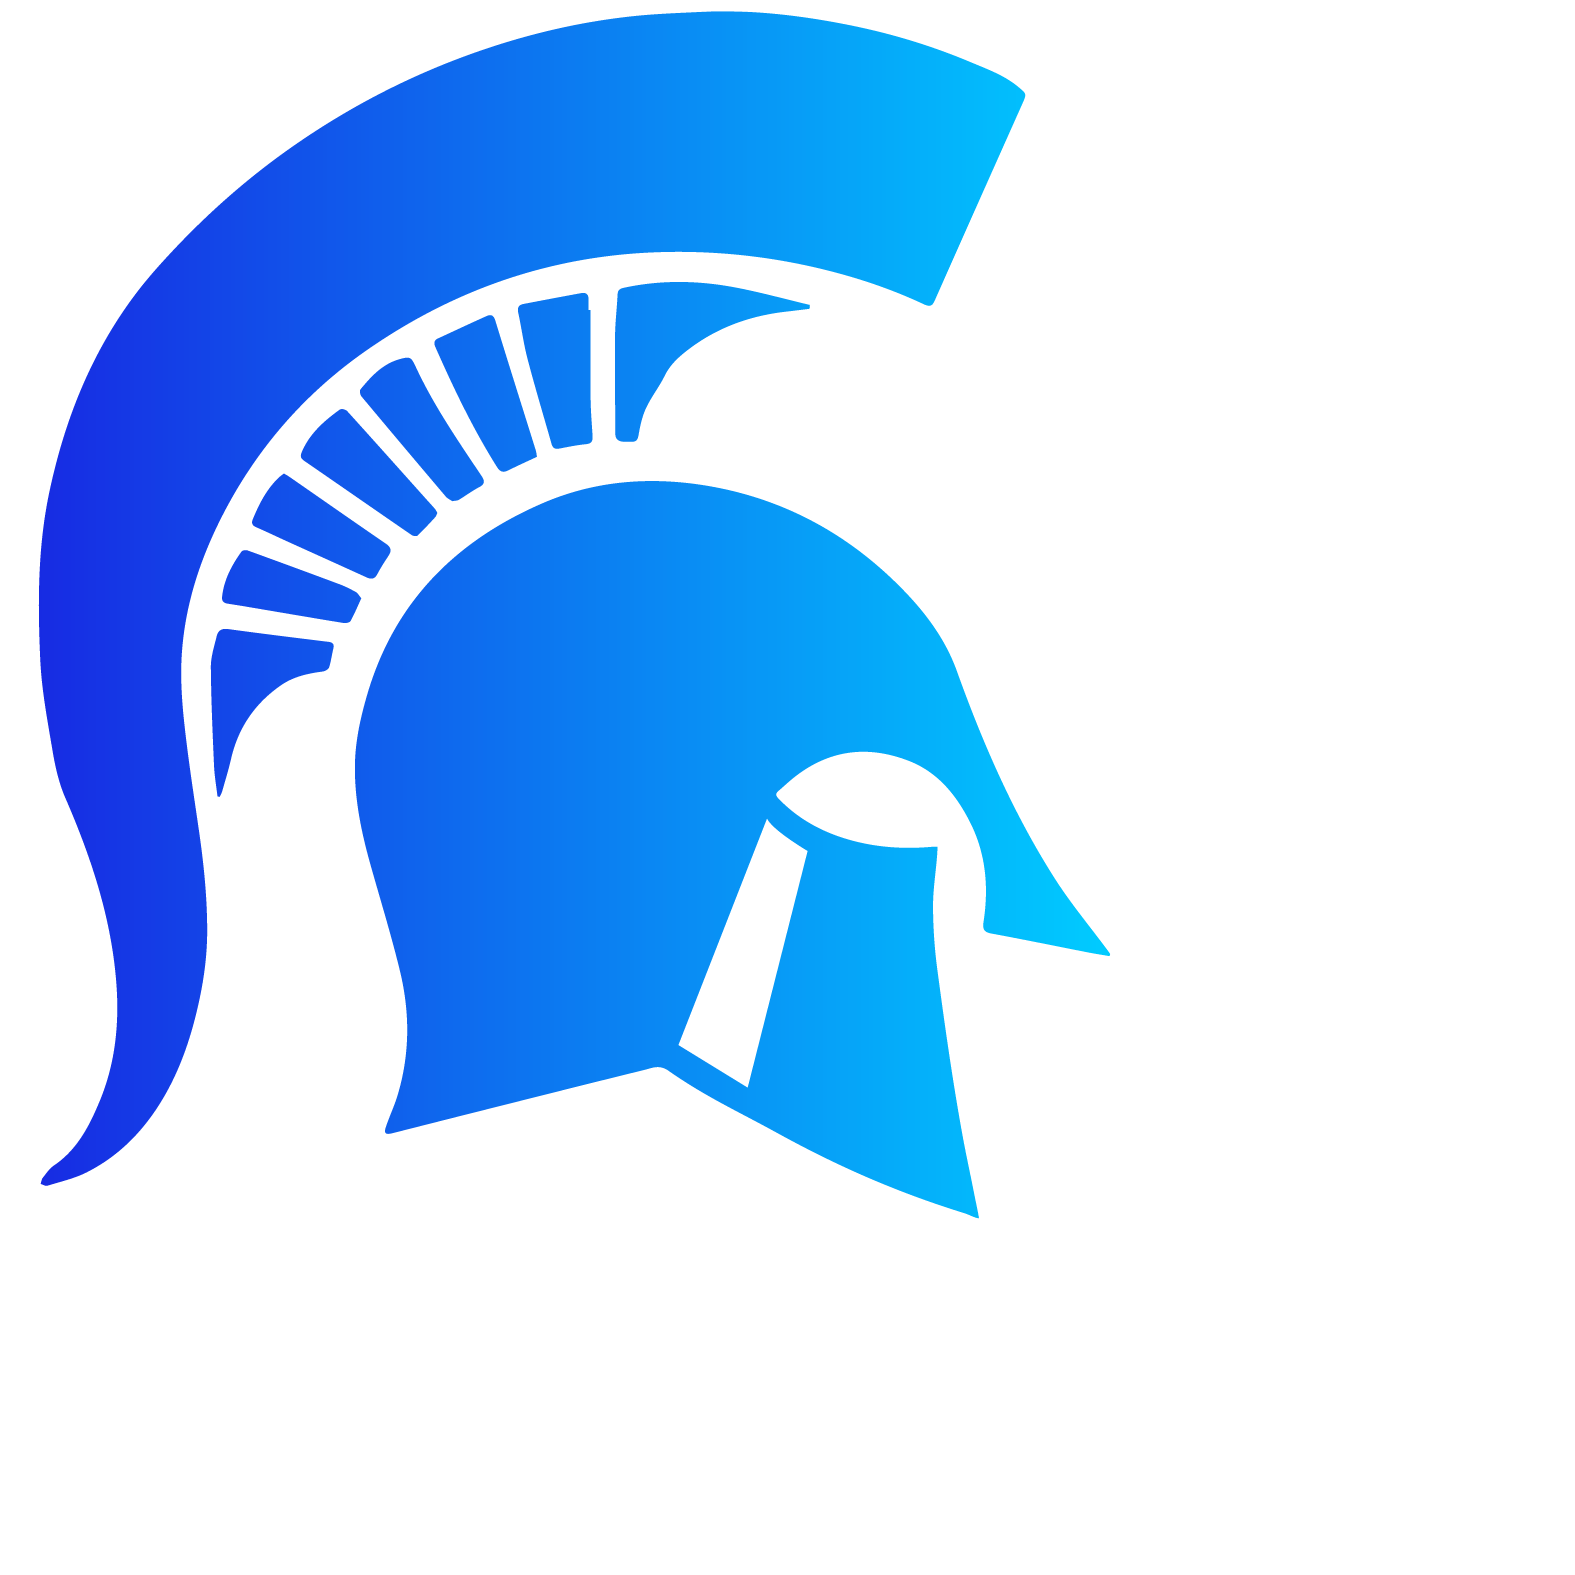 Amazing Sparta Pictures & Backgrounds